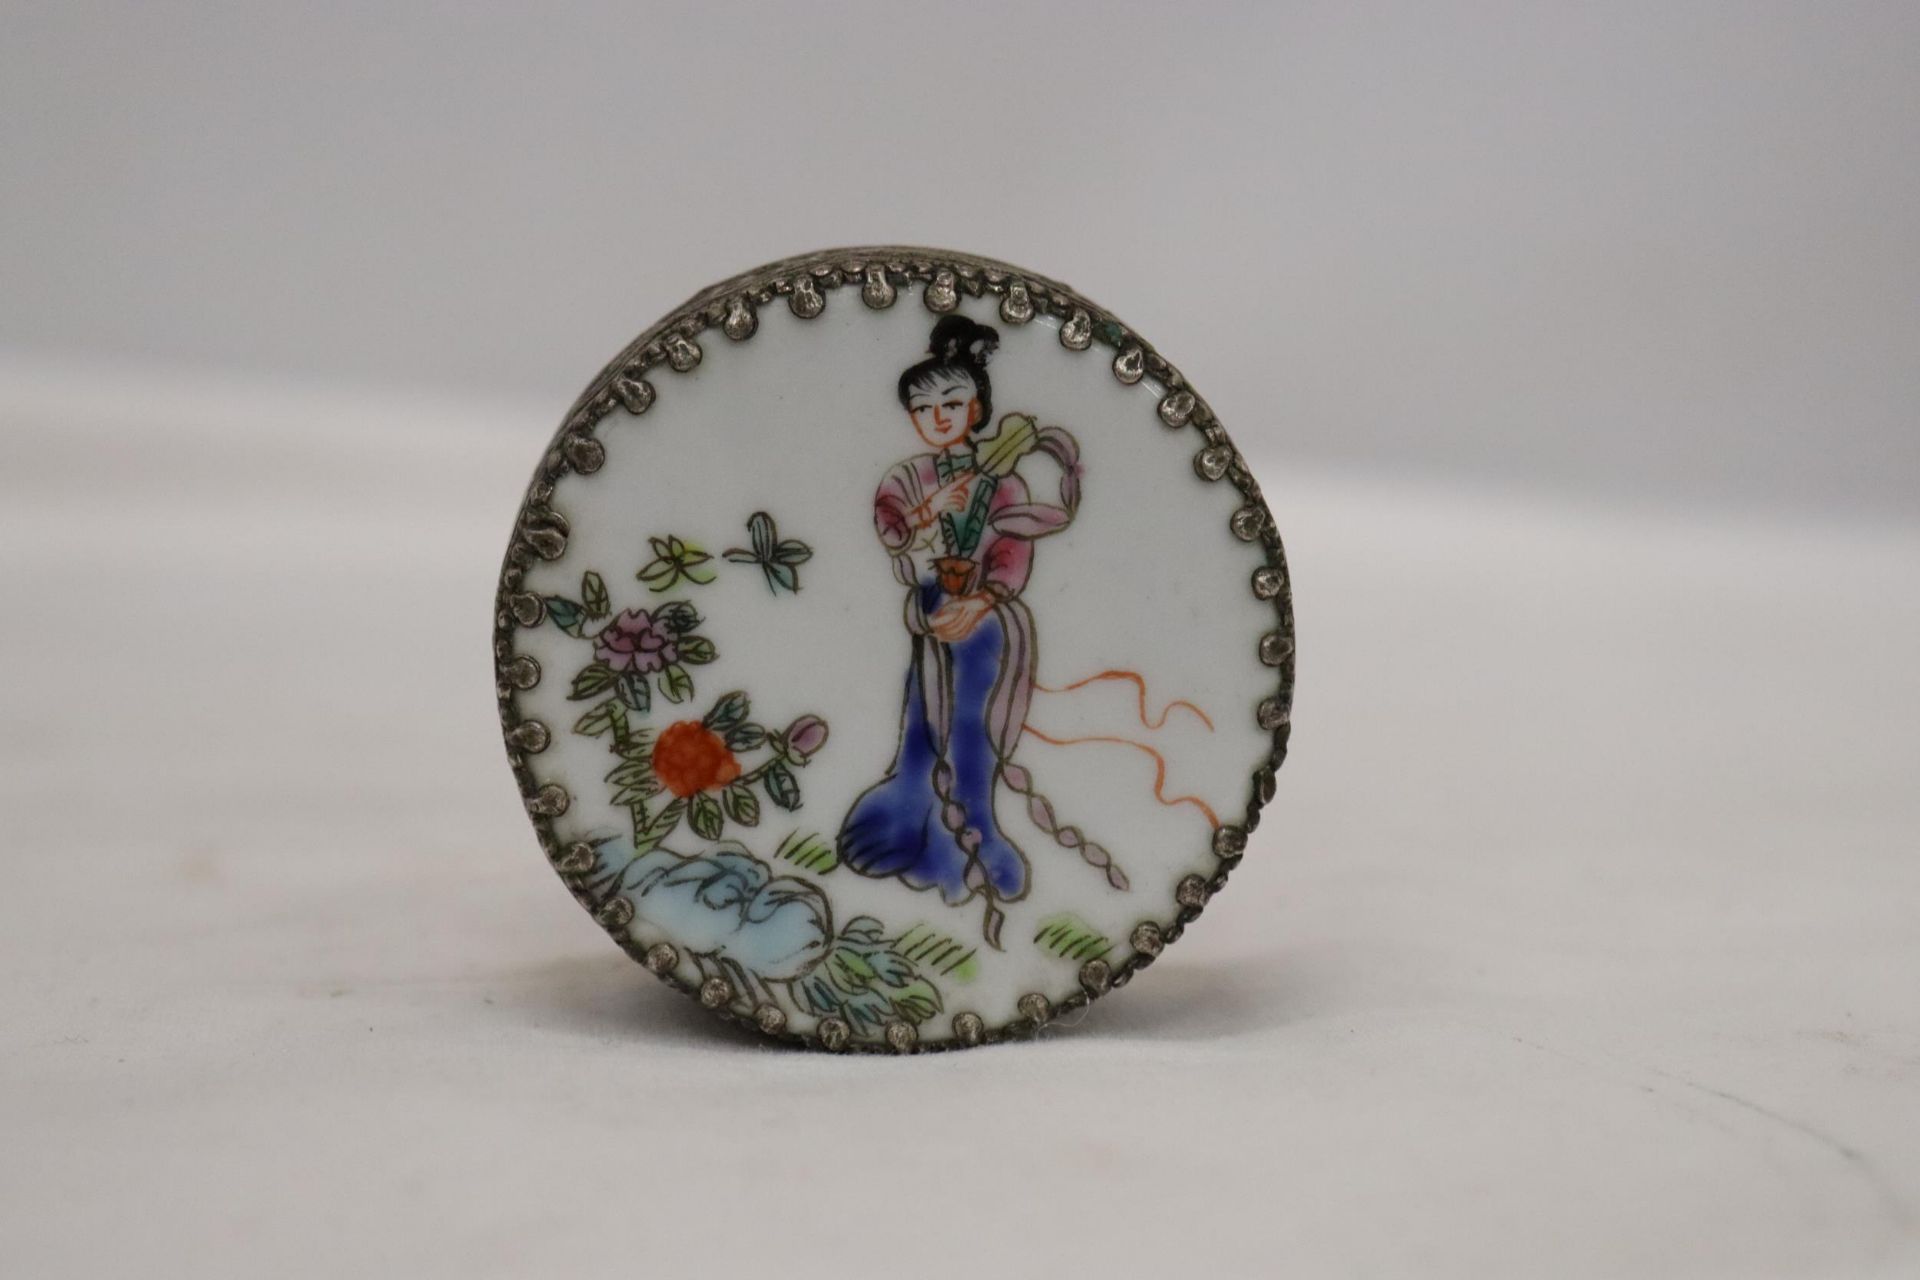 A VINTAGE SILVER TONE TRINKET BOX WITH THE IMAGE OF A JAPANESE LADY IN A FLORAL GARDEN - Image 6 of 6